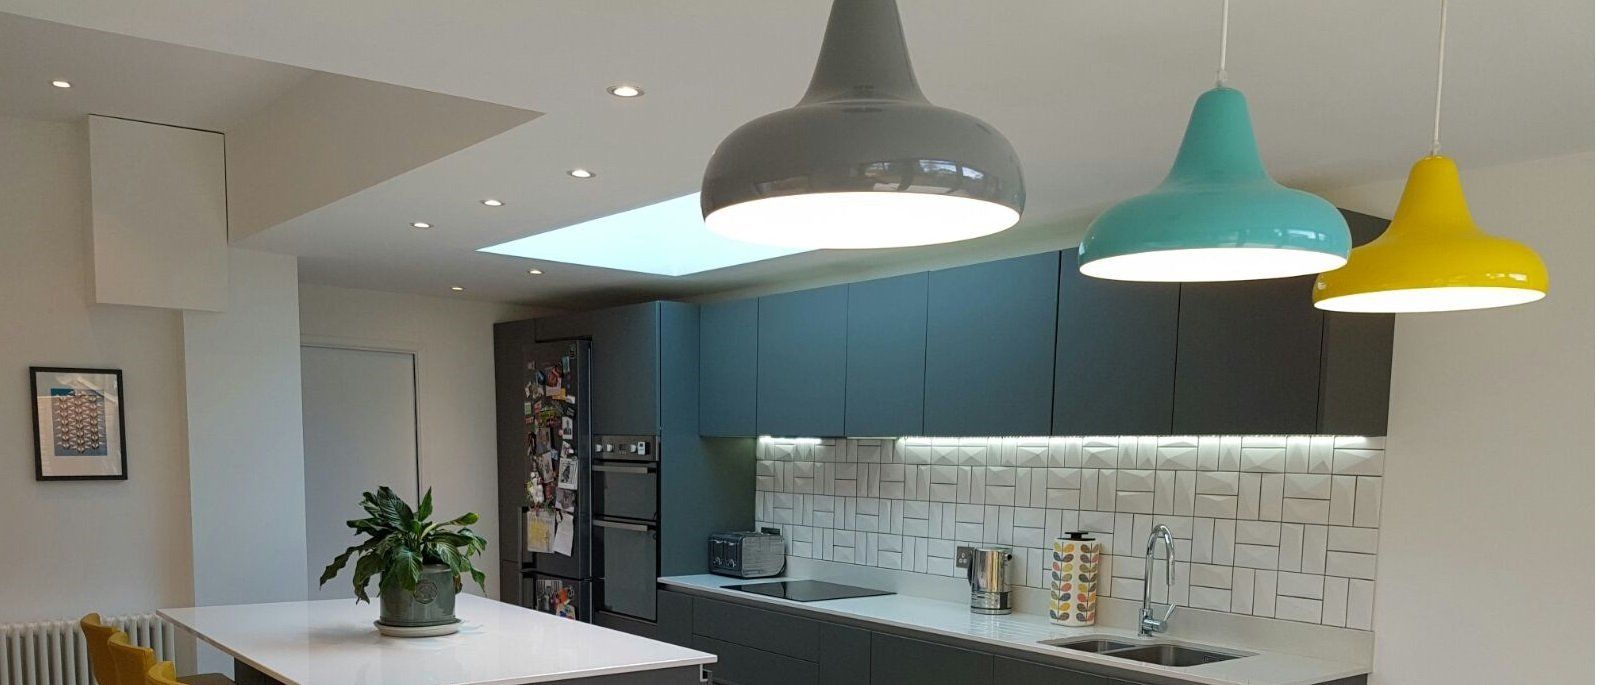 image of internal lighting installed by PhaseOne Electrical